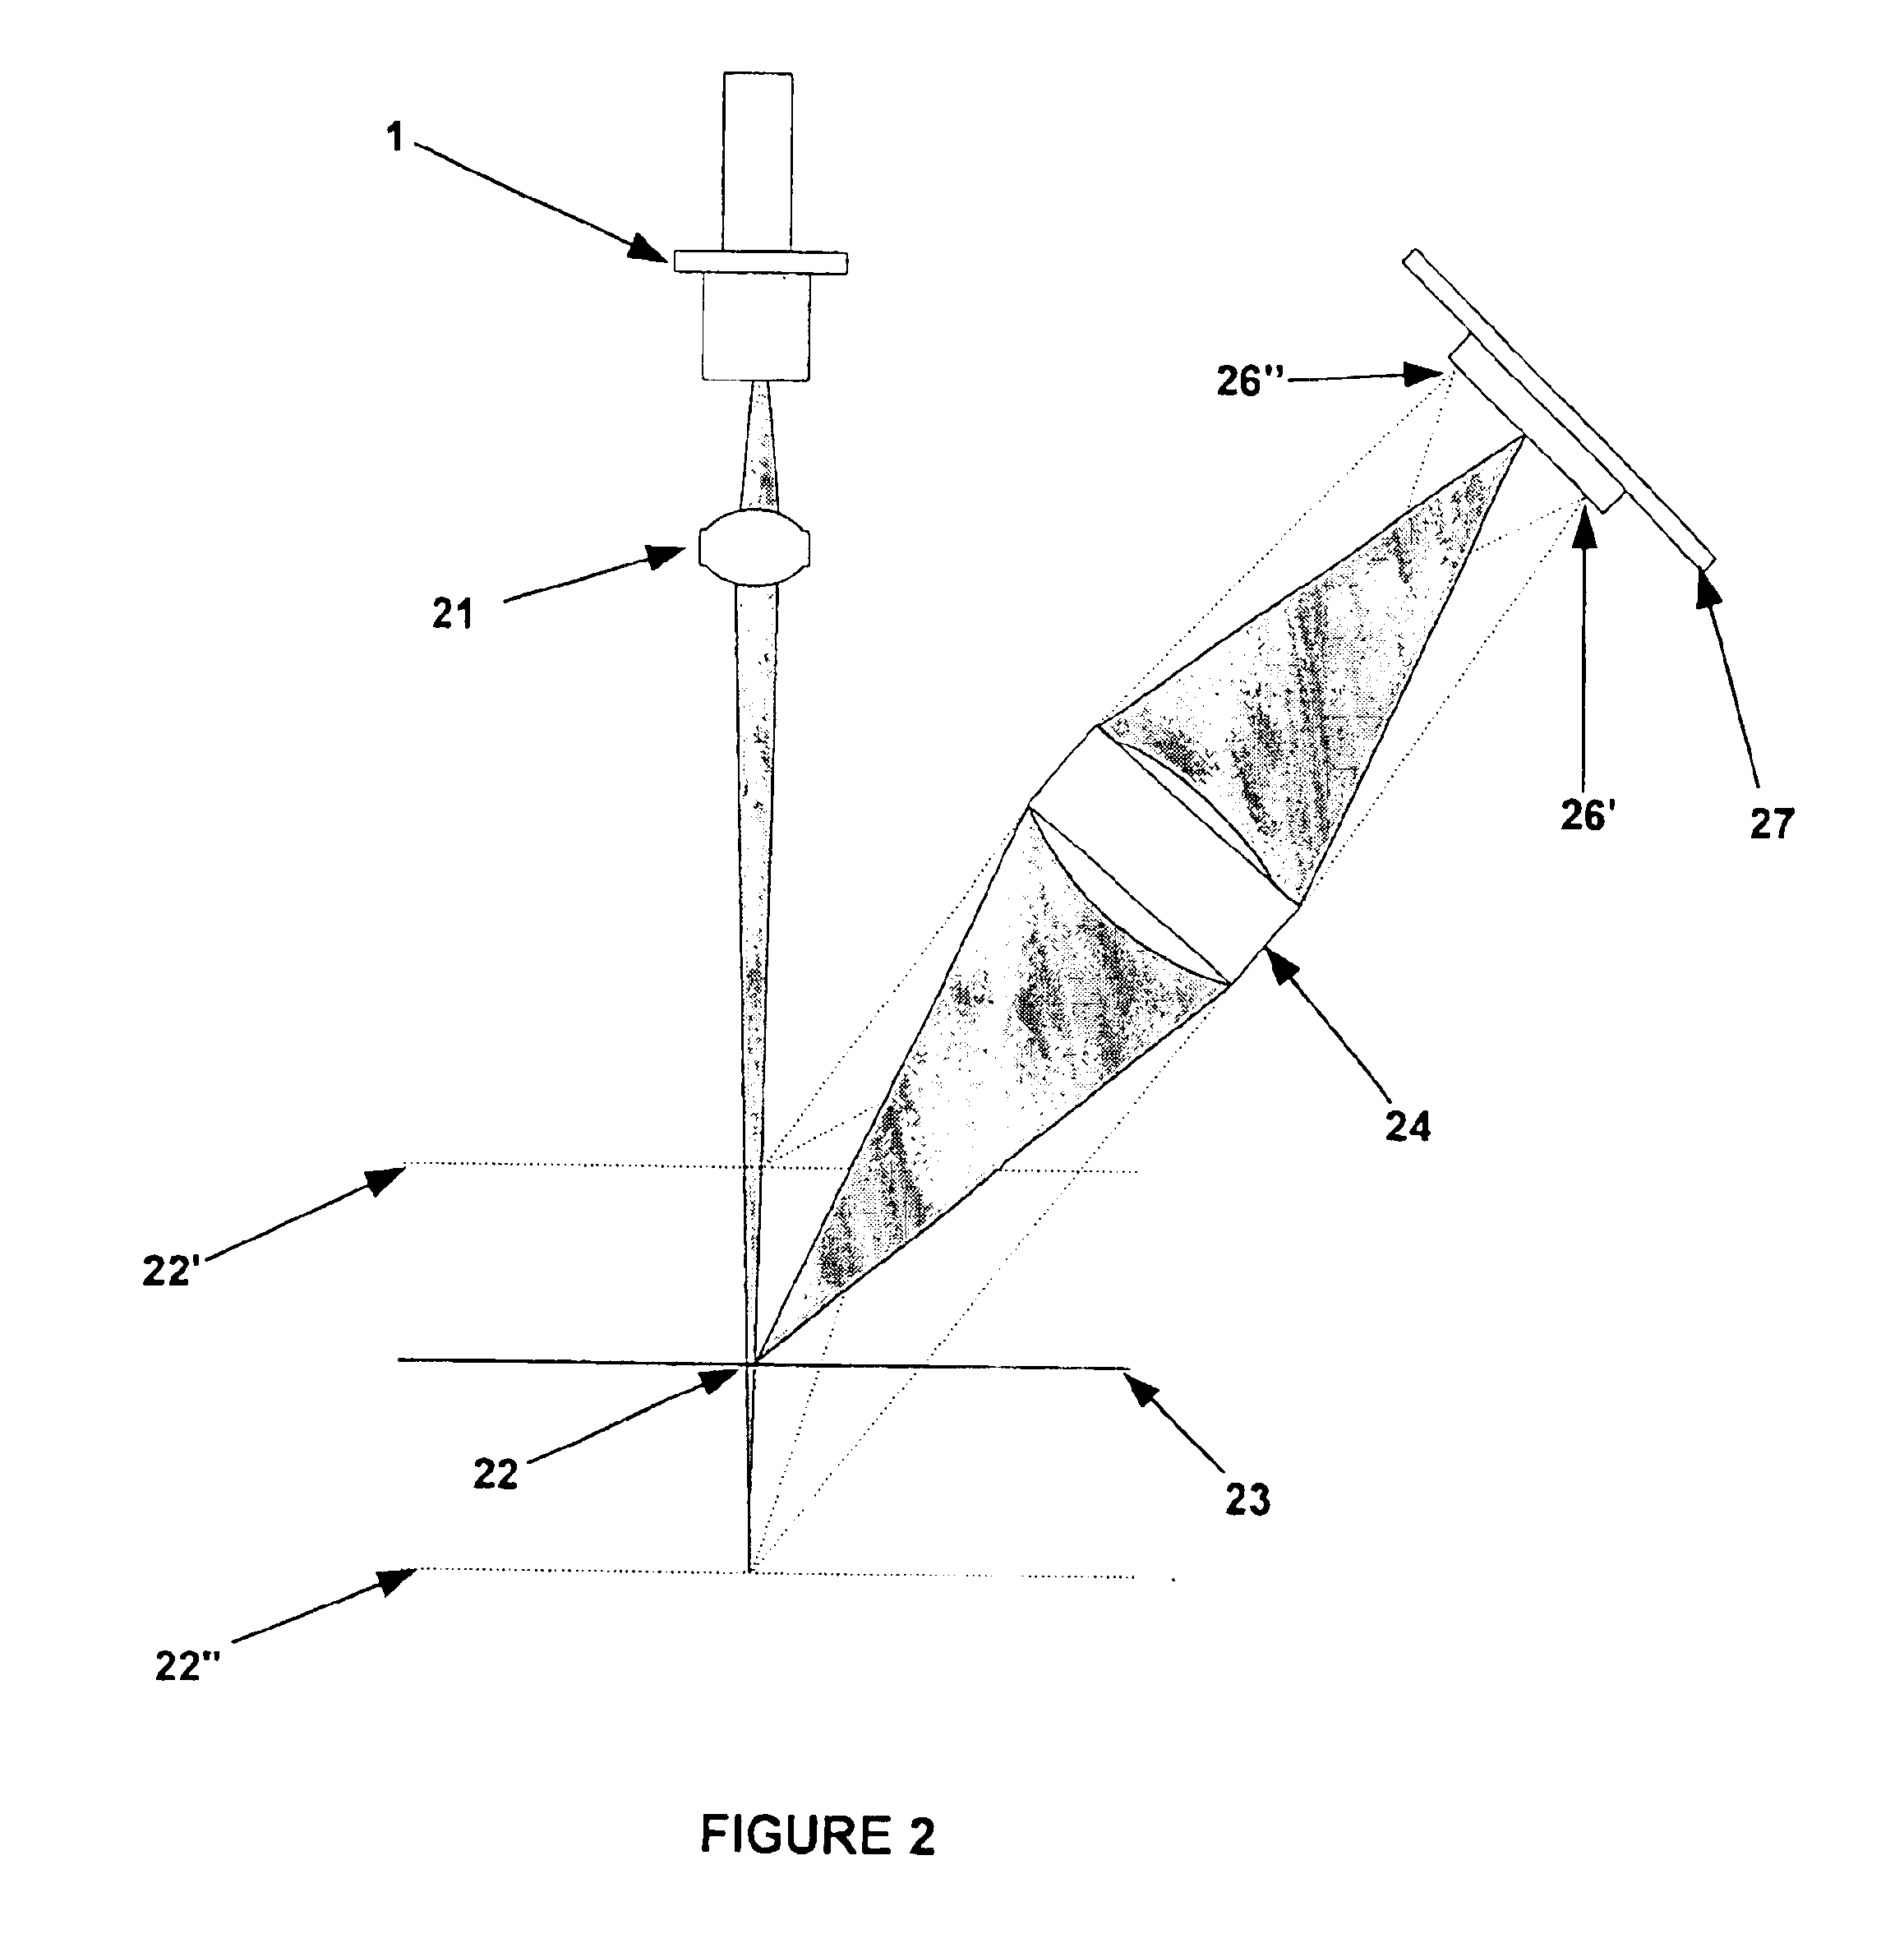 Method for processing in situ inspection reformer tube data